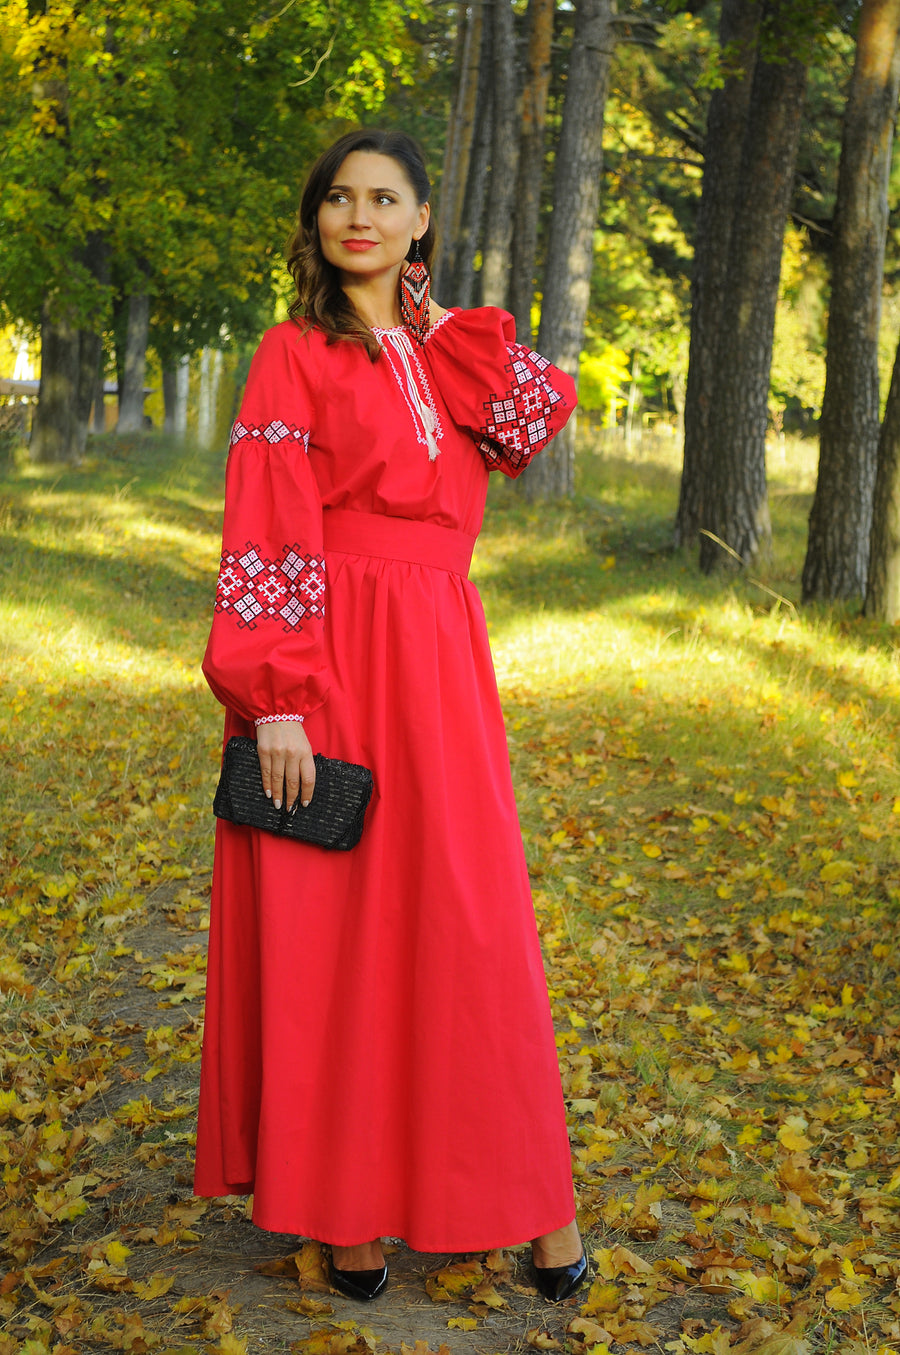 Luxury red evening dress with embroidery